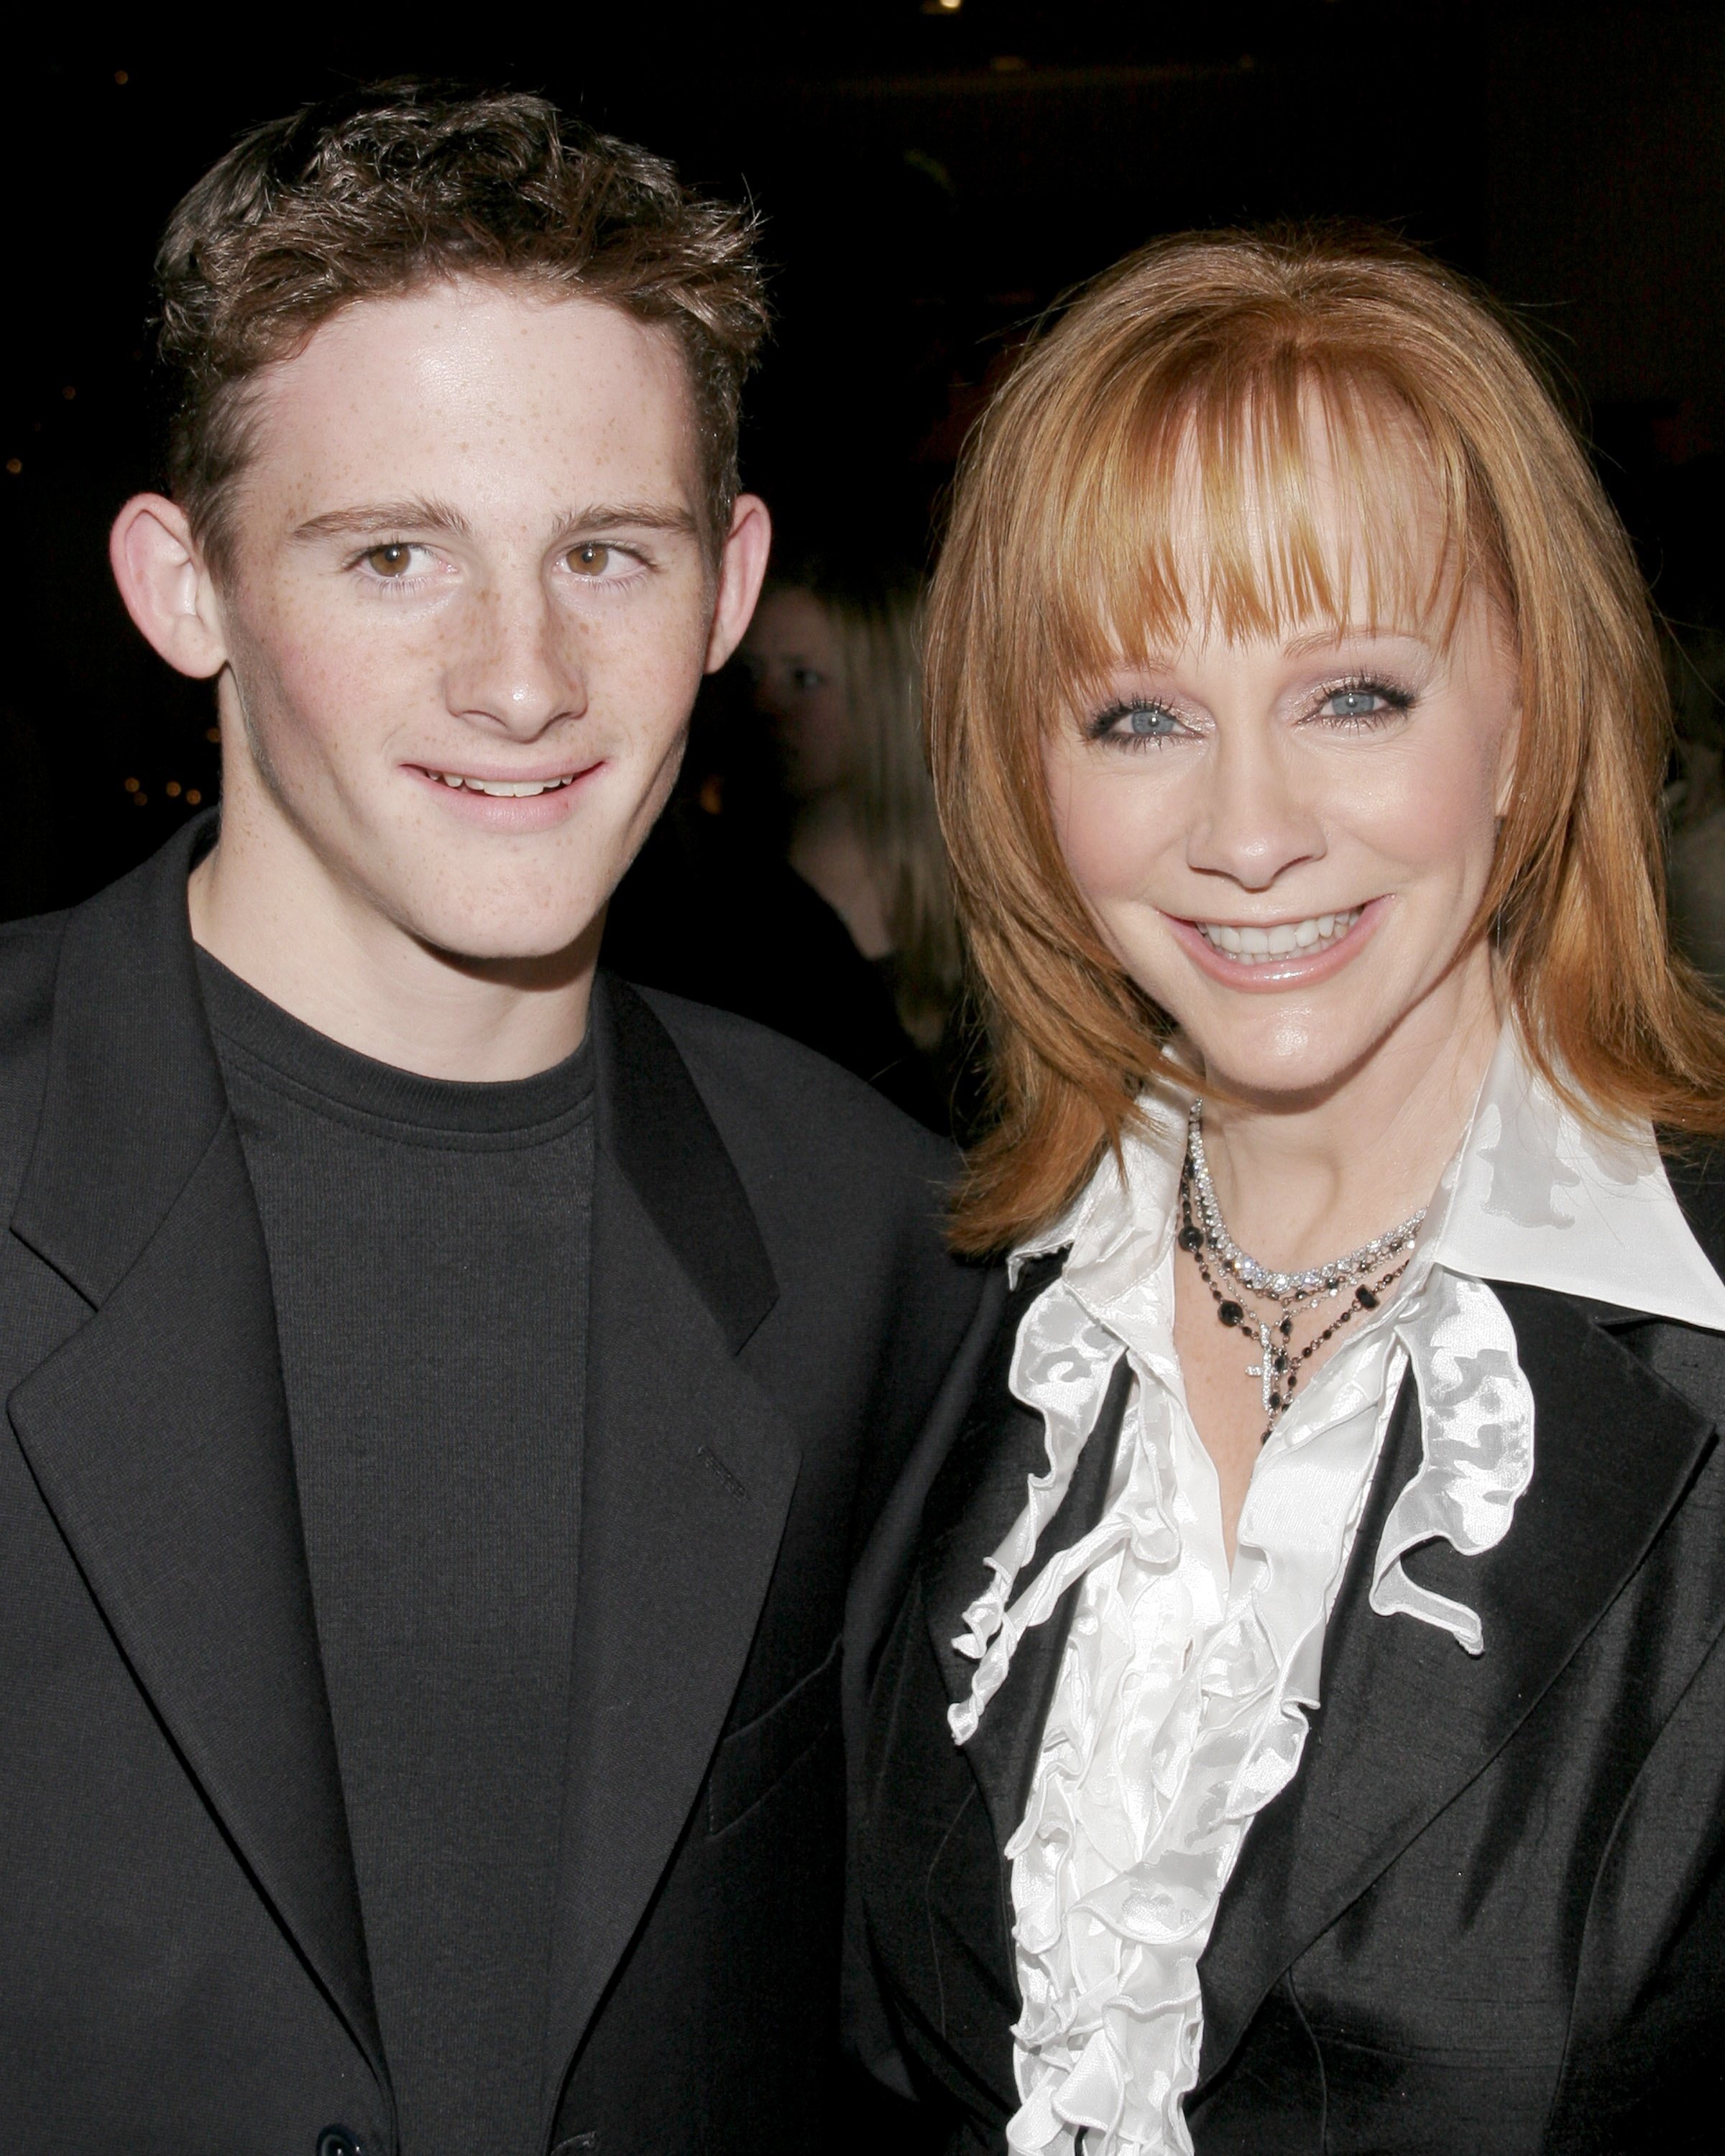 Reba McEntire and her son, Shelby attend the The 7th Annual Family Television Awards in Beverly Hills, California on November 30, 2005. | Source Mike Fanous/Getty Images